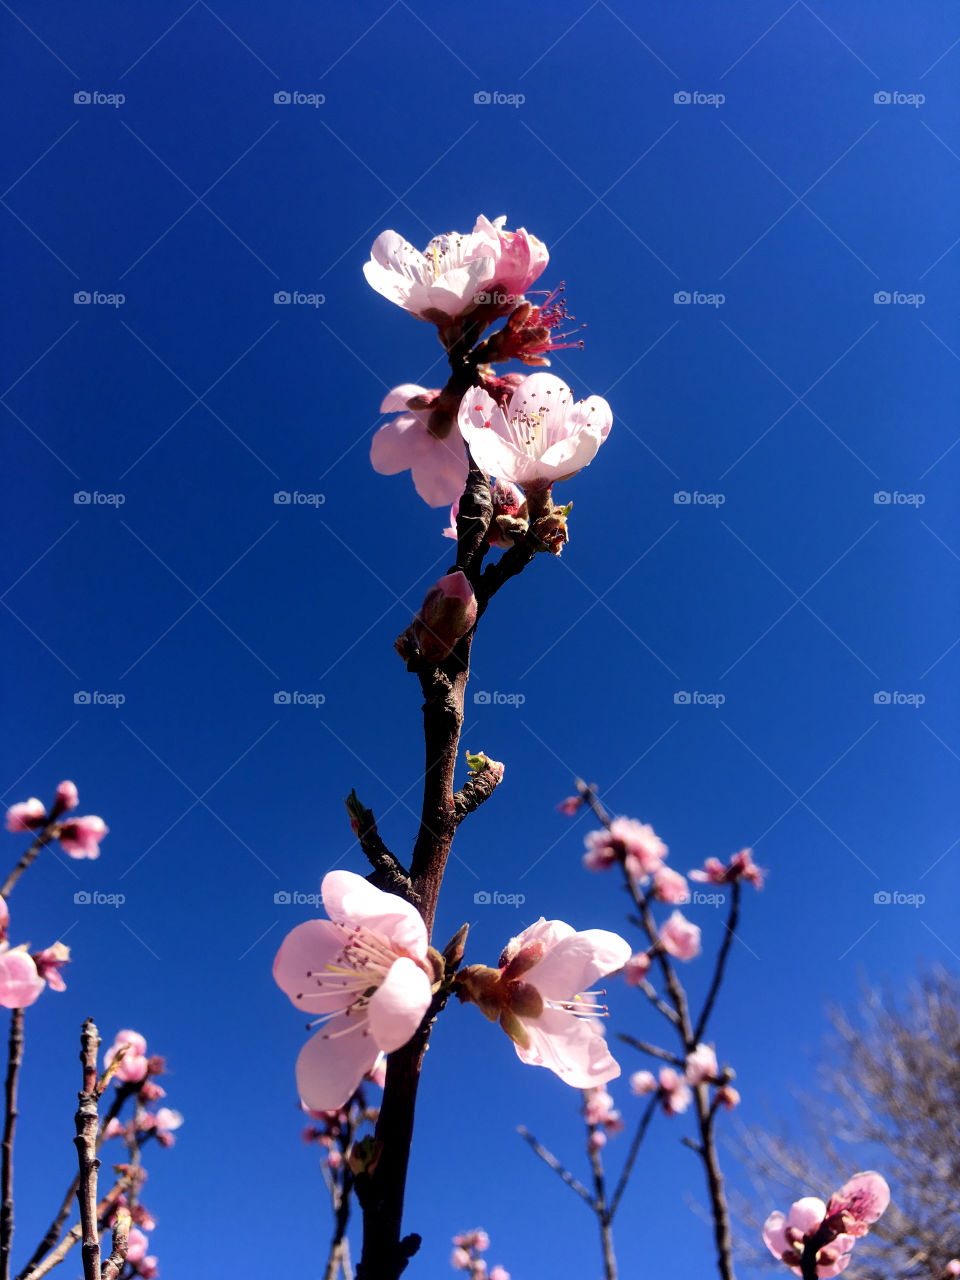 Peach blossoms in the blue sky